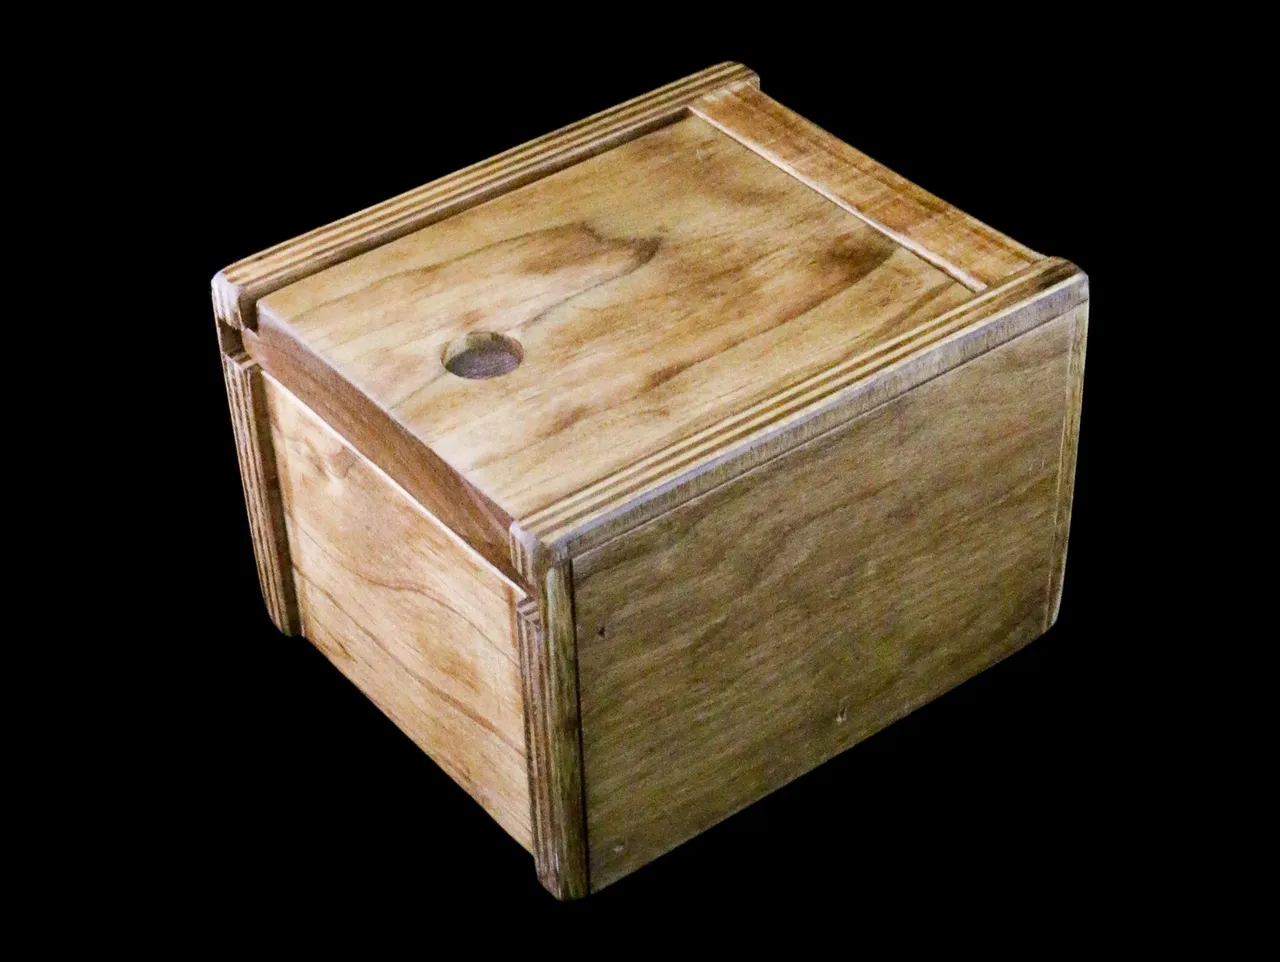 A wooden box with a lid on top of it.